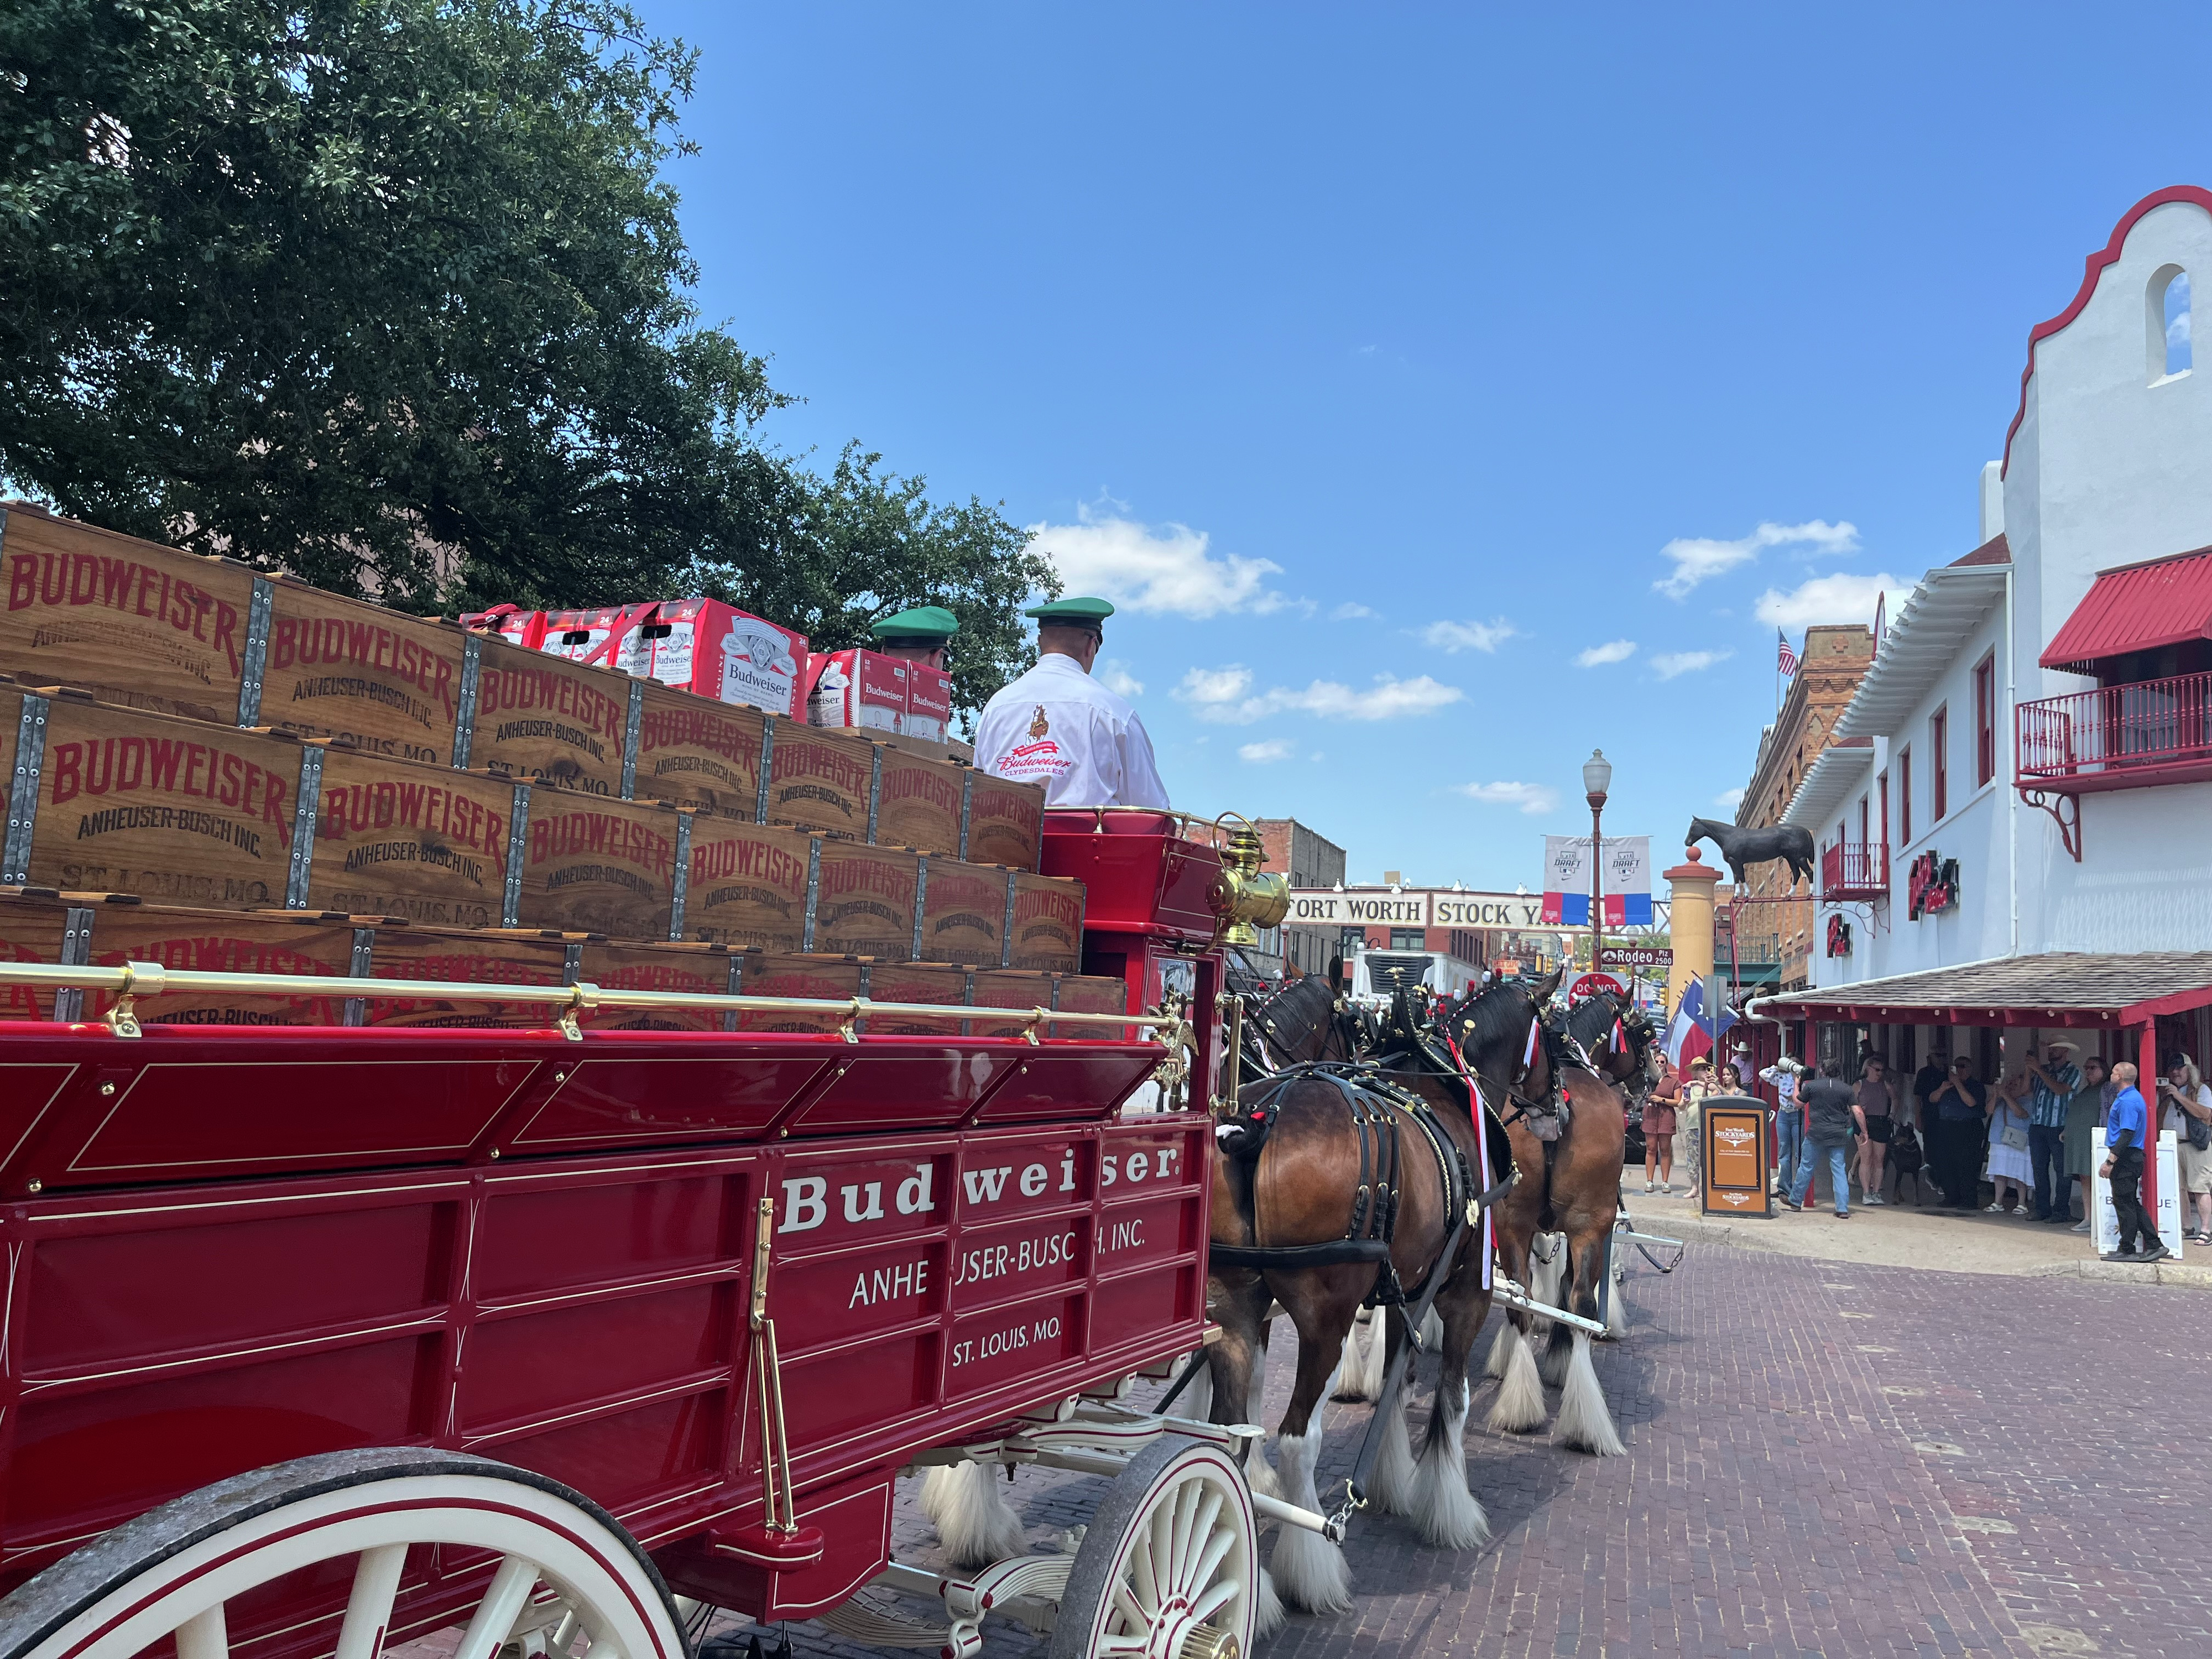 Budweiser Clydesdales arrive in North Texas for All-Star Game